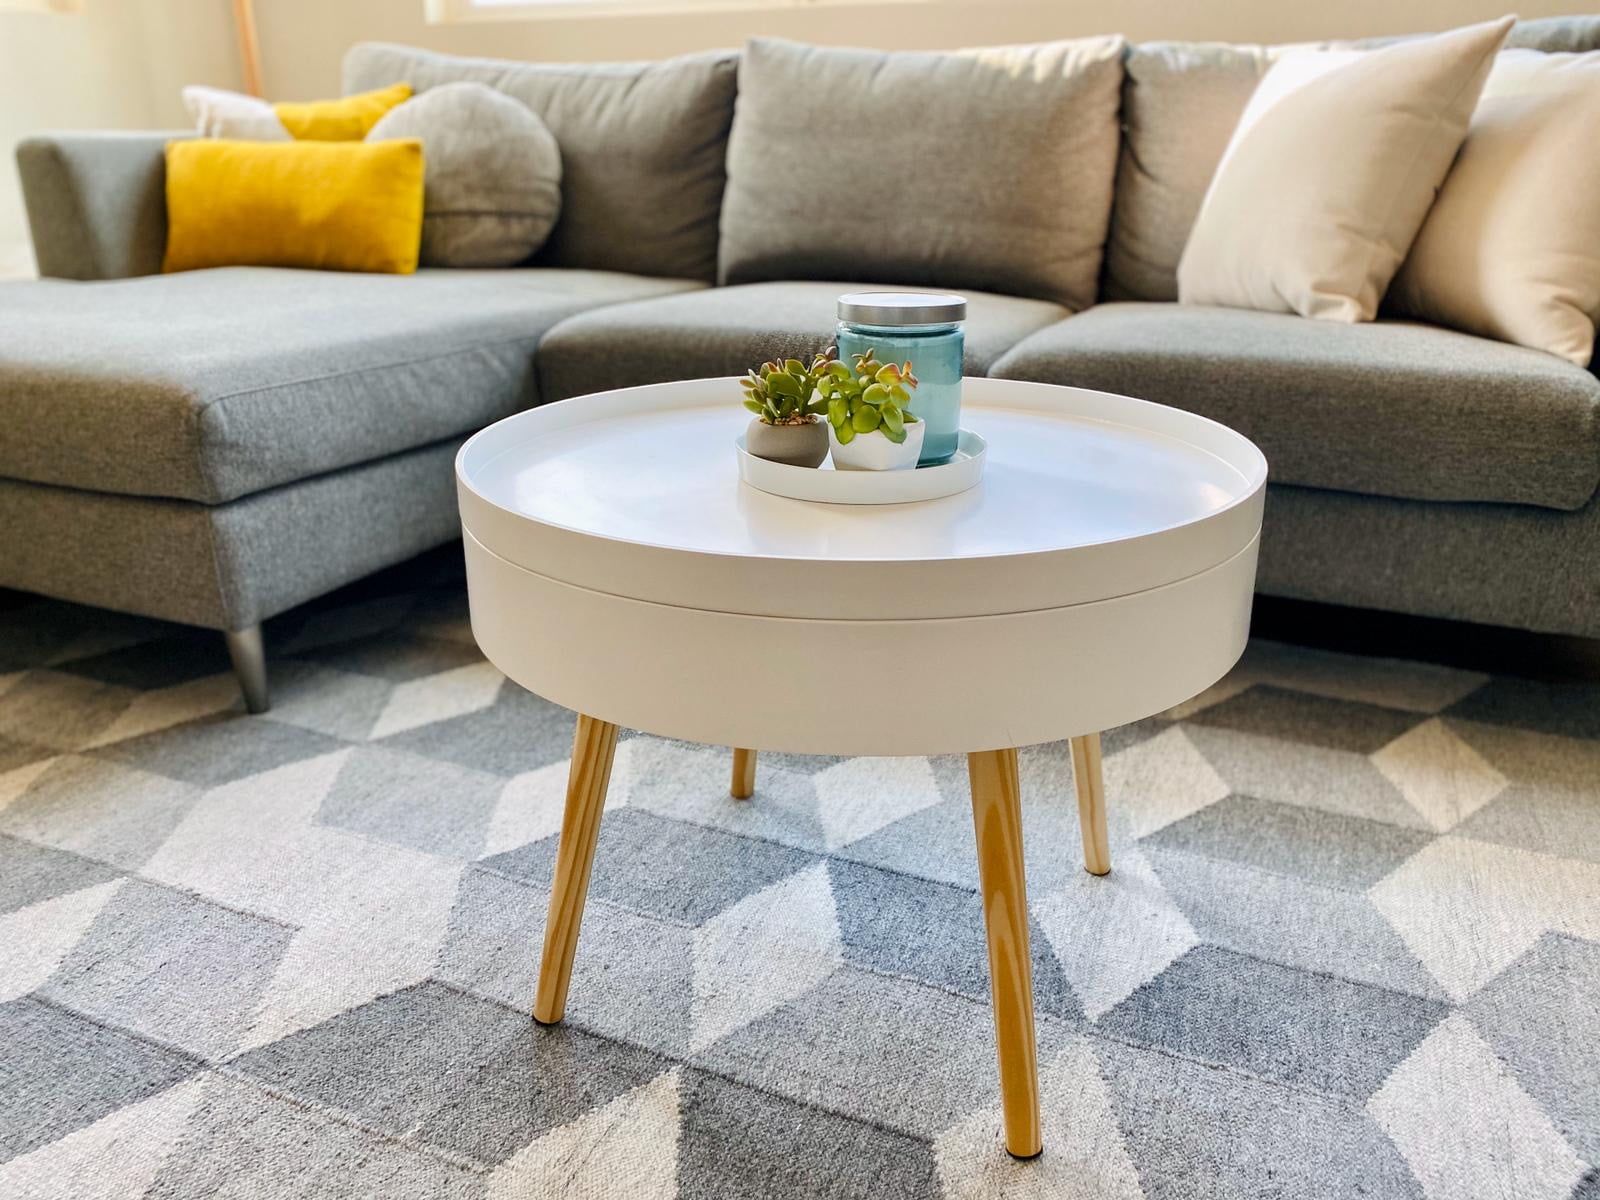 The Simple Project Zoe Mid Century Wood With Storage Round Coffee Table Inside Round Coffee Tables With Storage (Gallery 6 of 20)